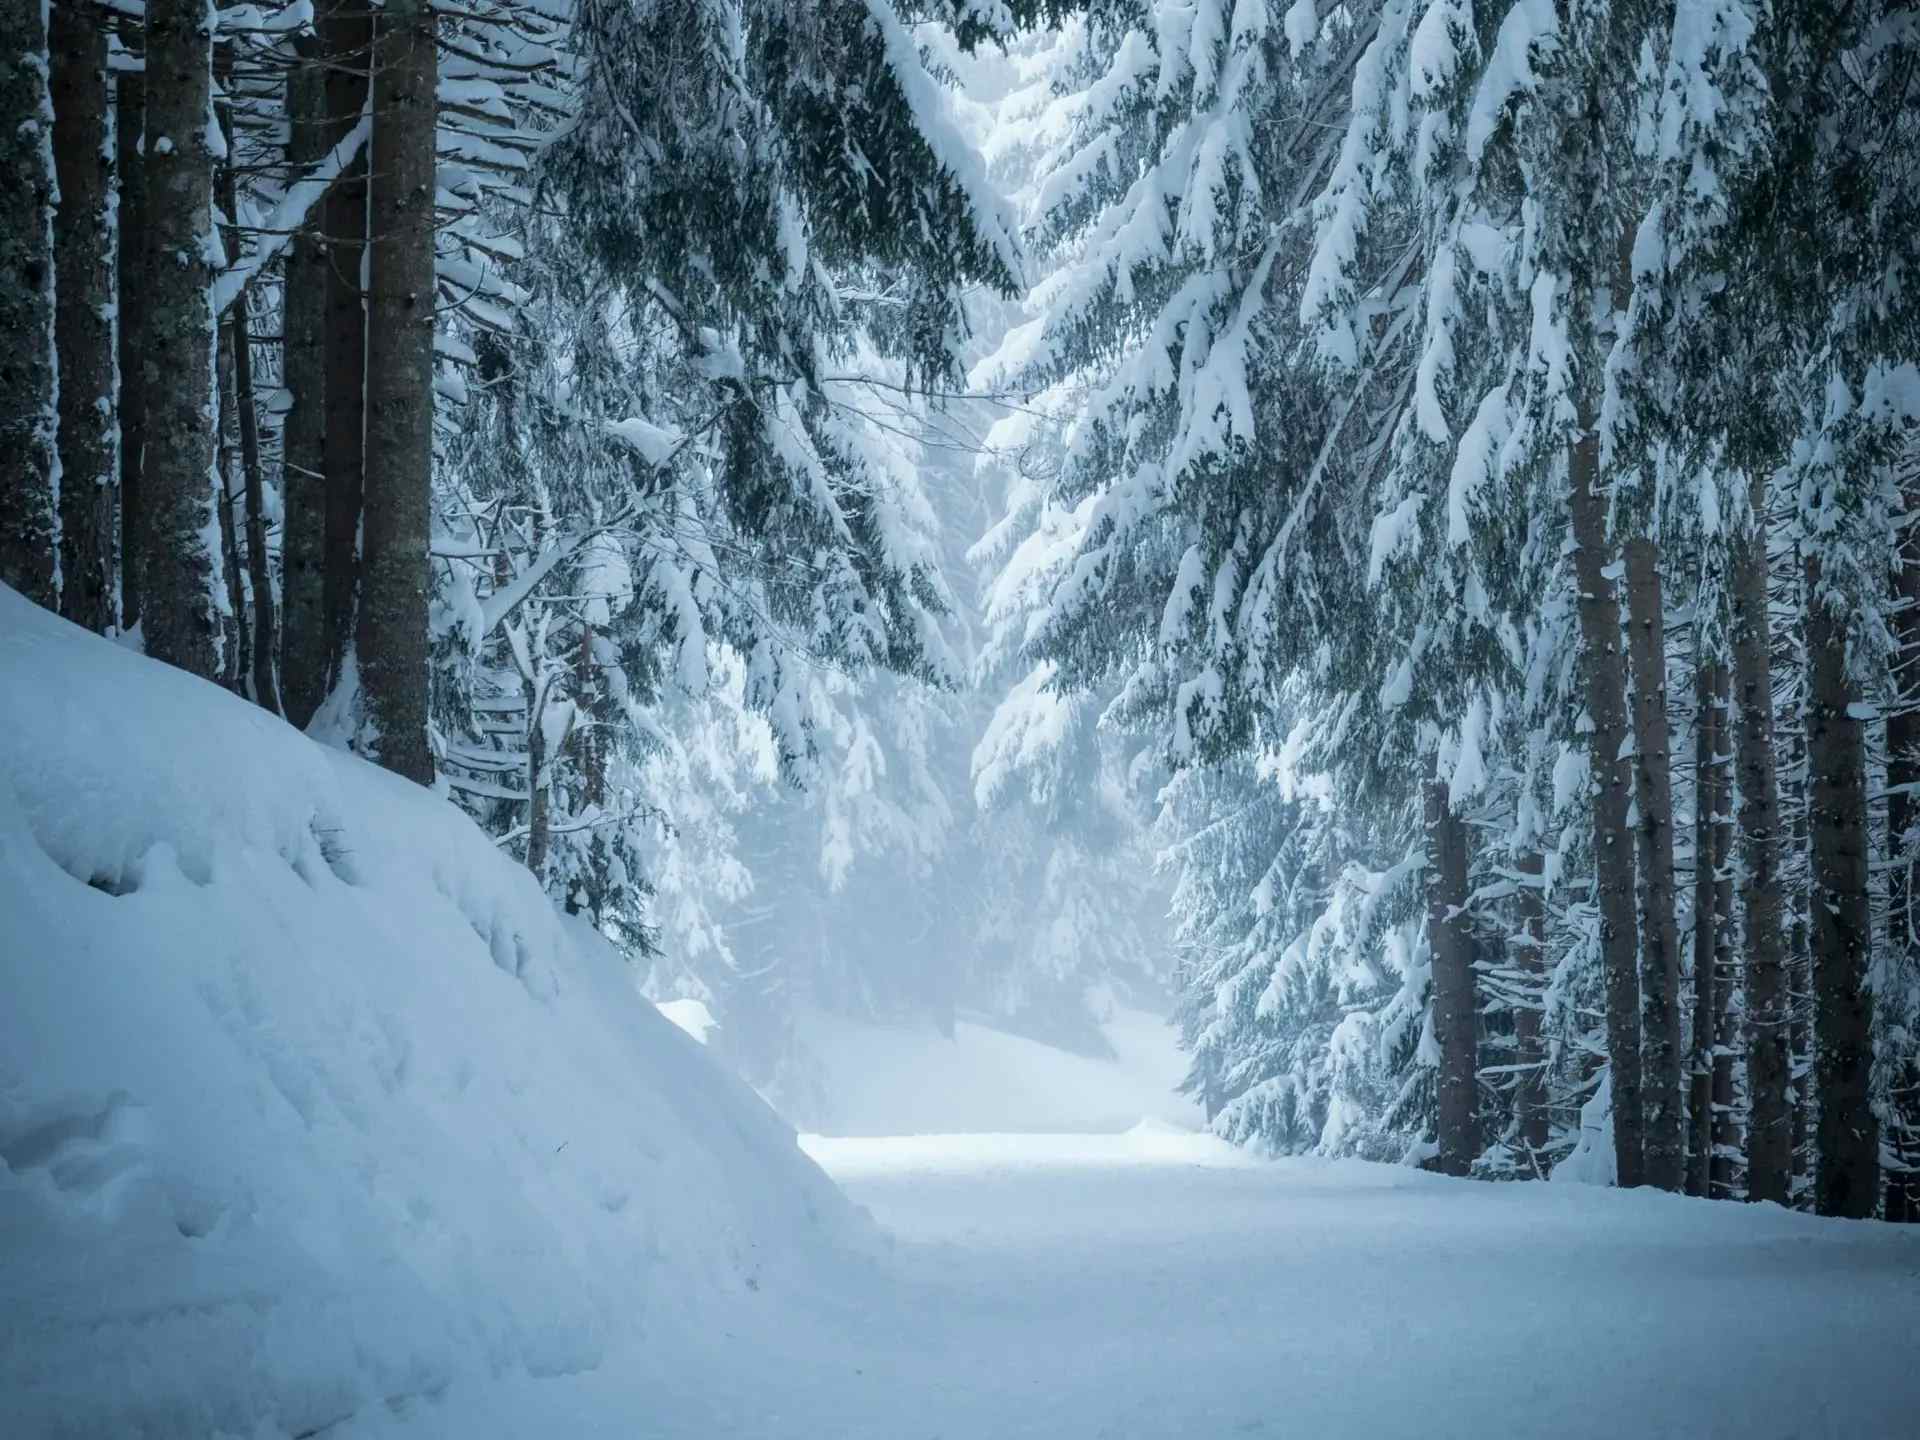 Snowy forest in the Dolomites, Italy.